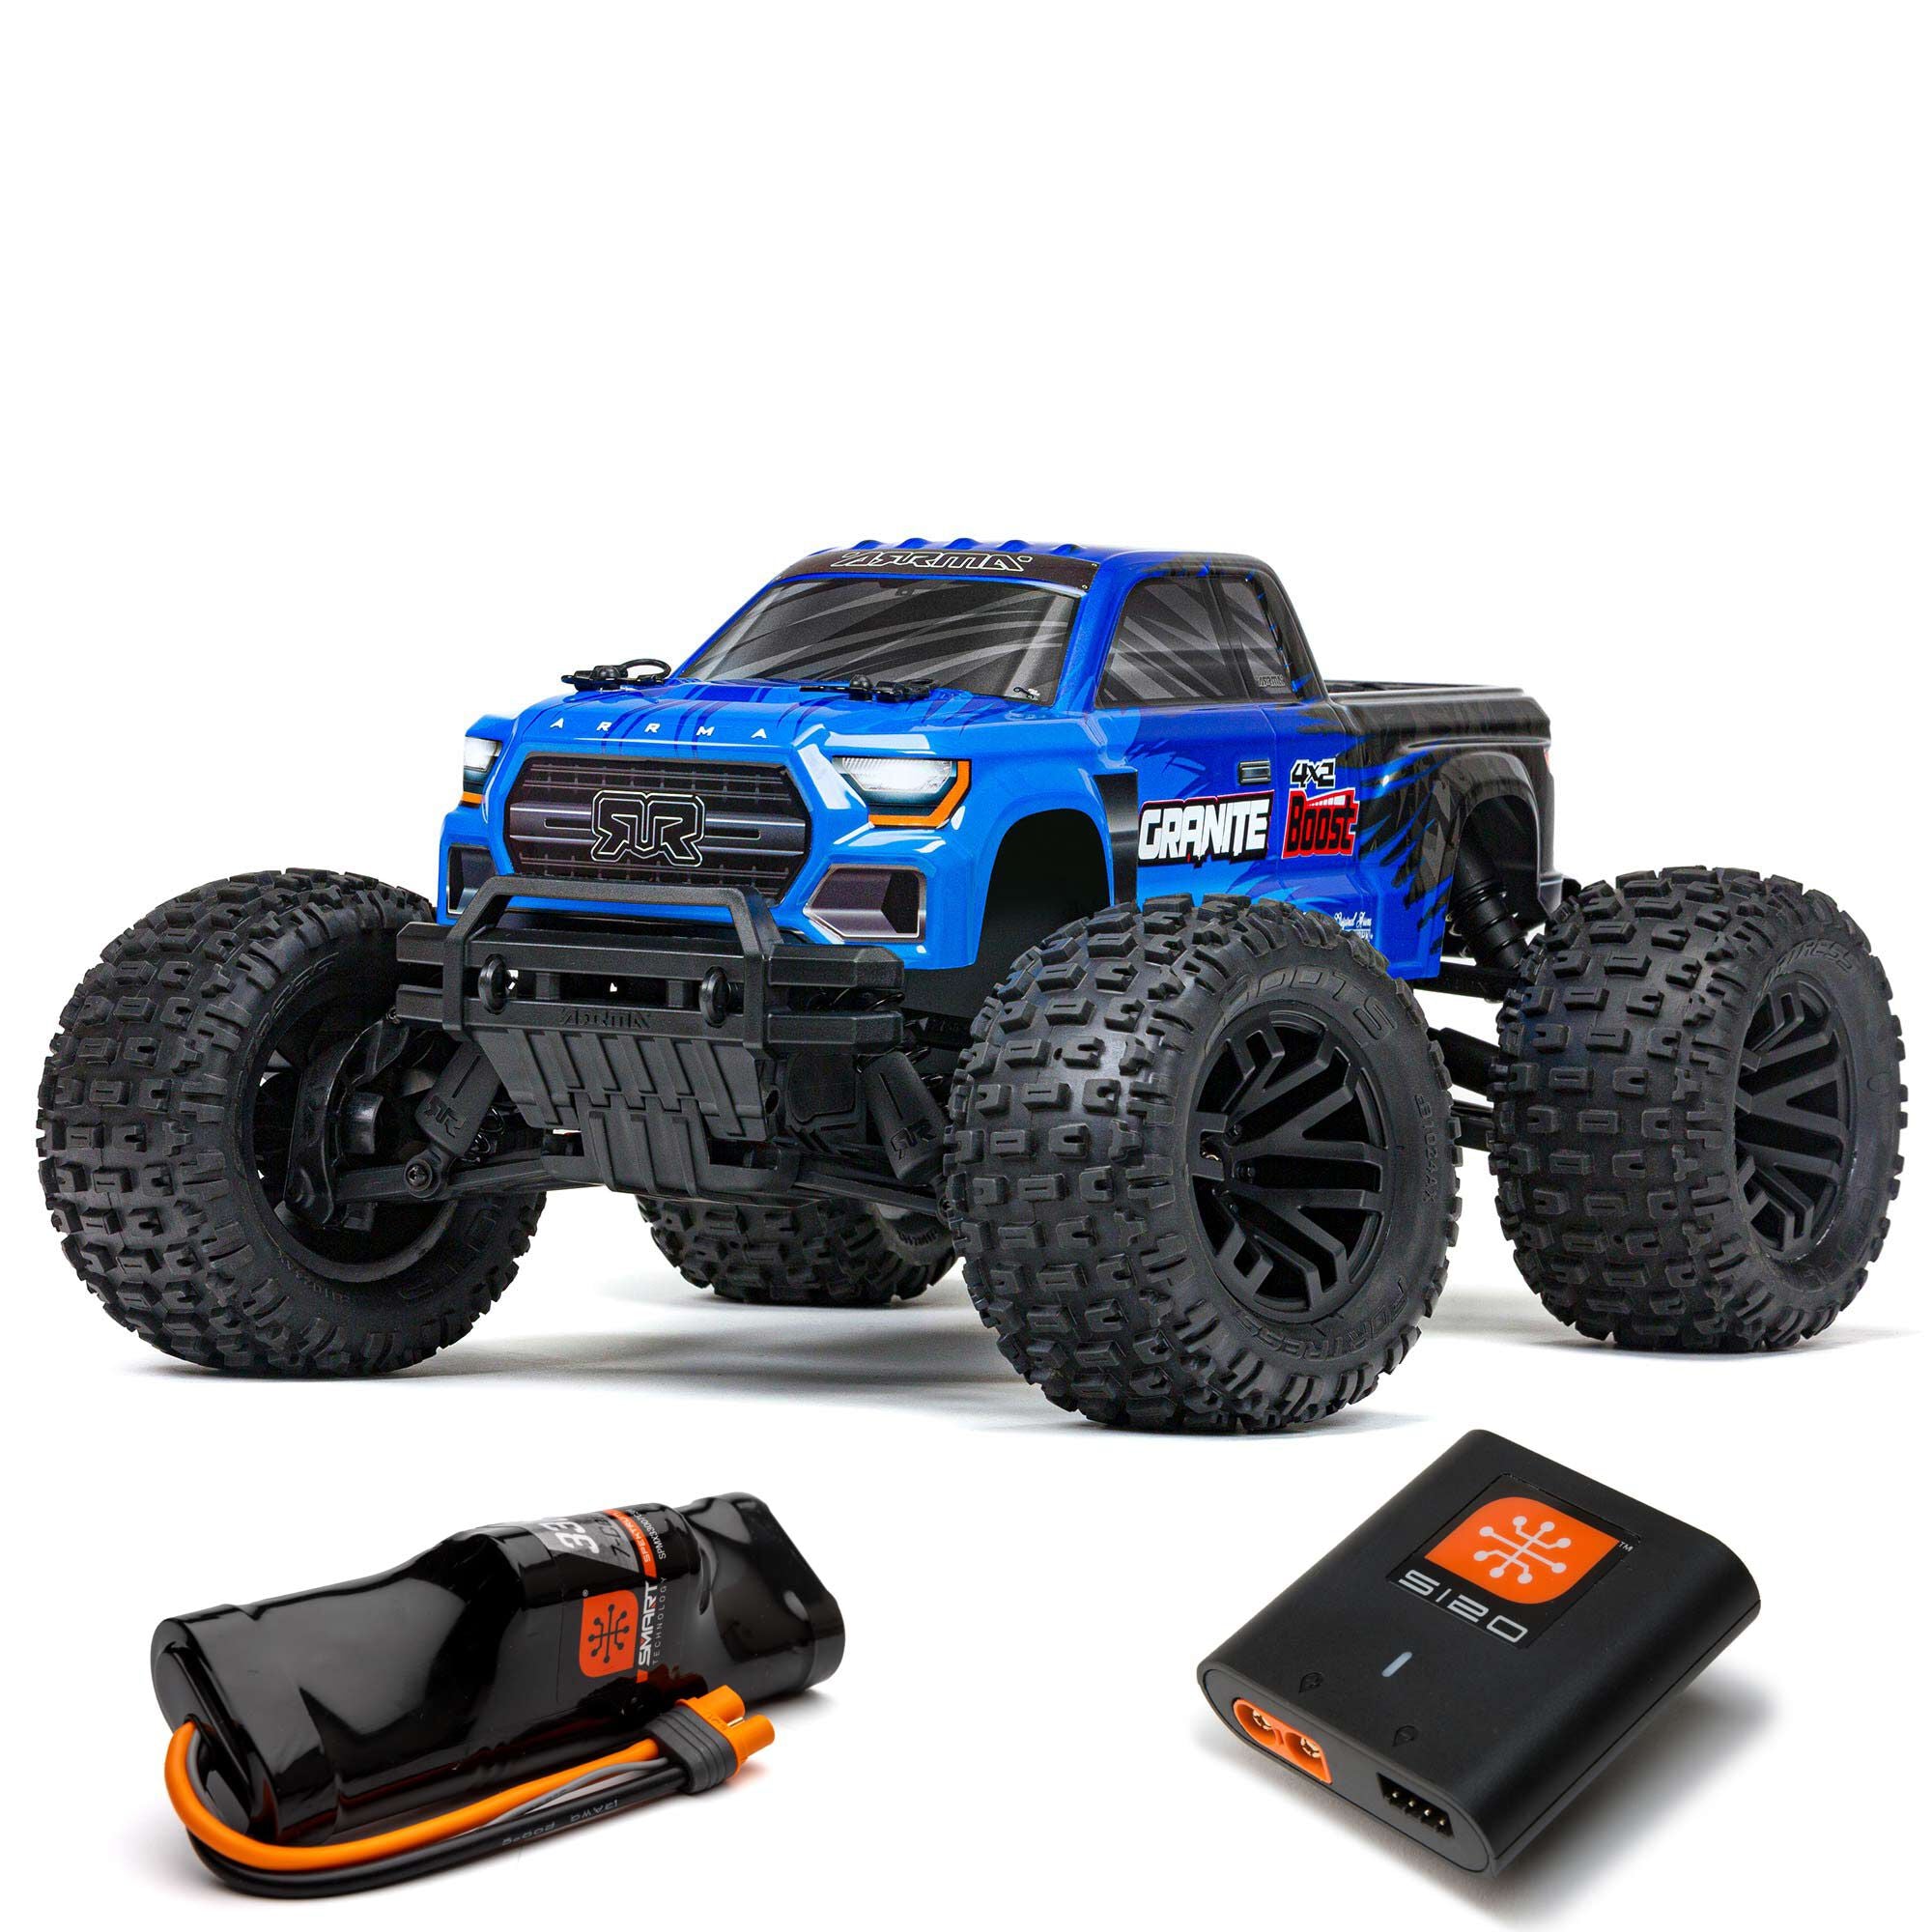 Arrma Granite Grom Is A Tiny RC Monster Truck